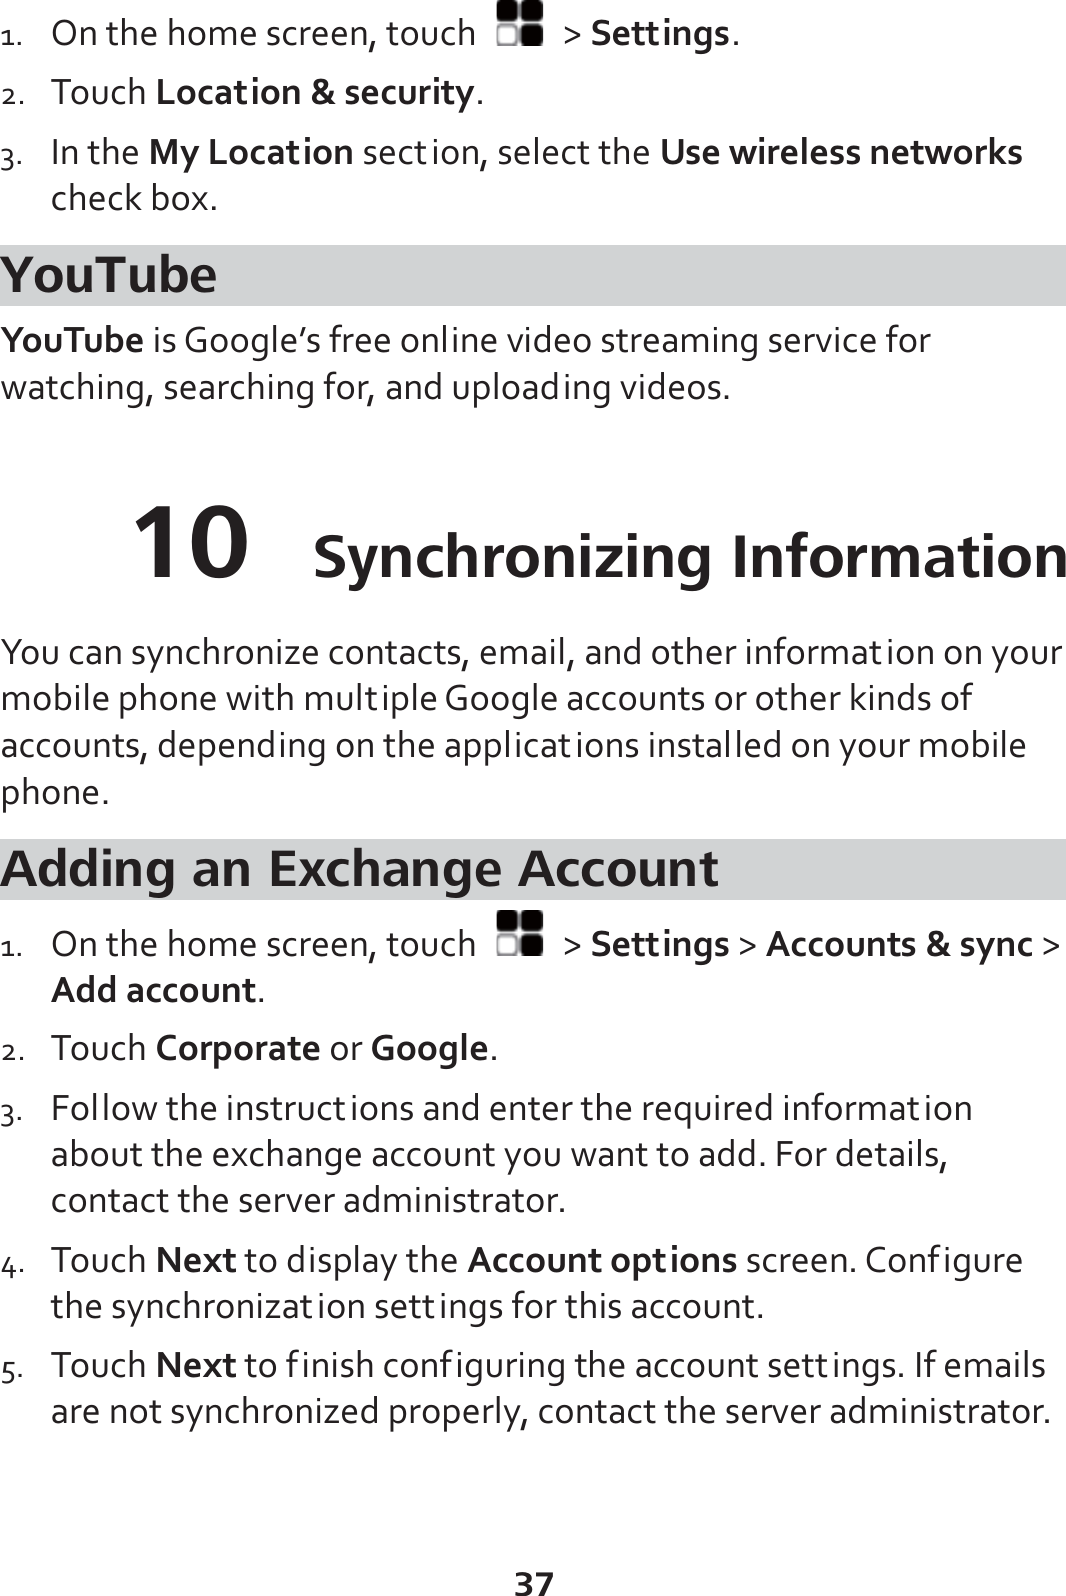 37 1. On the home screen, touch   &gt; Settings. 2. Touch Location &amp; security. 3. In the My Location section, select the Use wireless networks check box. YouTube YouTube is Google’s free online video streaming service for watching, searching for, and uploading videos. 10  Synchronizing Information You can synchronize contacts, email, and other information on your mobile phone with multiple Google accounts or other kinds of accounts, depending on the applications installed on your mobile phone. Adding an Exchange Account 1. On the home screen, touch   &gt; Settings &gt; Accounts &amp; sync &gt; Add account. 2. Touch Corporate or Google. 3. Follow the instructions and enter the required information about the exchange account you want to add. For details, contact the server administrator. 4. Touch Next to display the Account options screen. Configure the synchronization settings for this account. 5. Touch Next to finish configuring the account settings. If emails are not synchronized properly, contact the server administrator. 